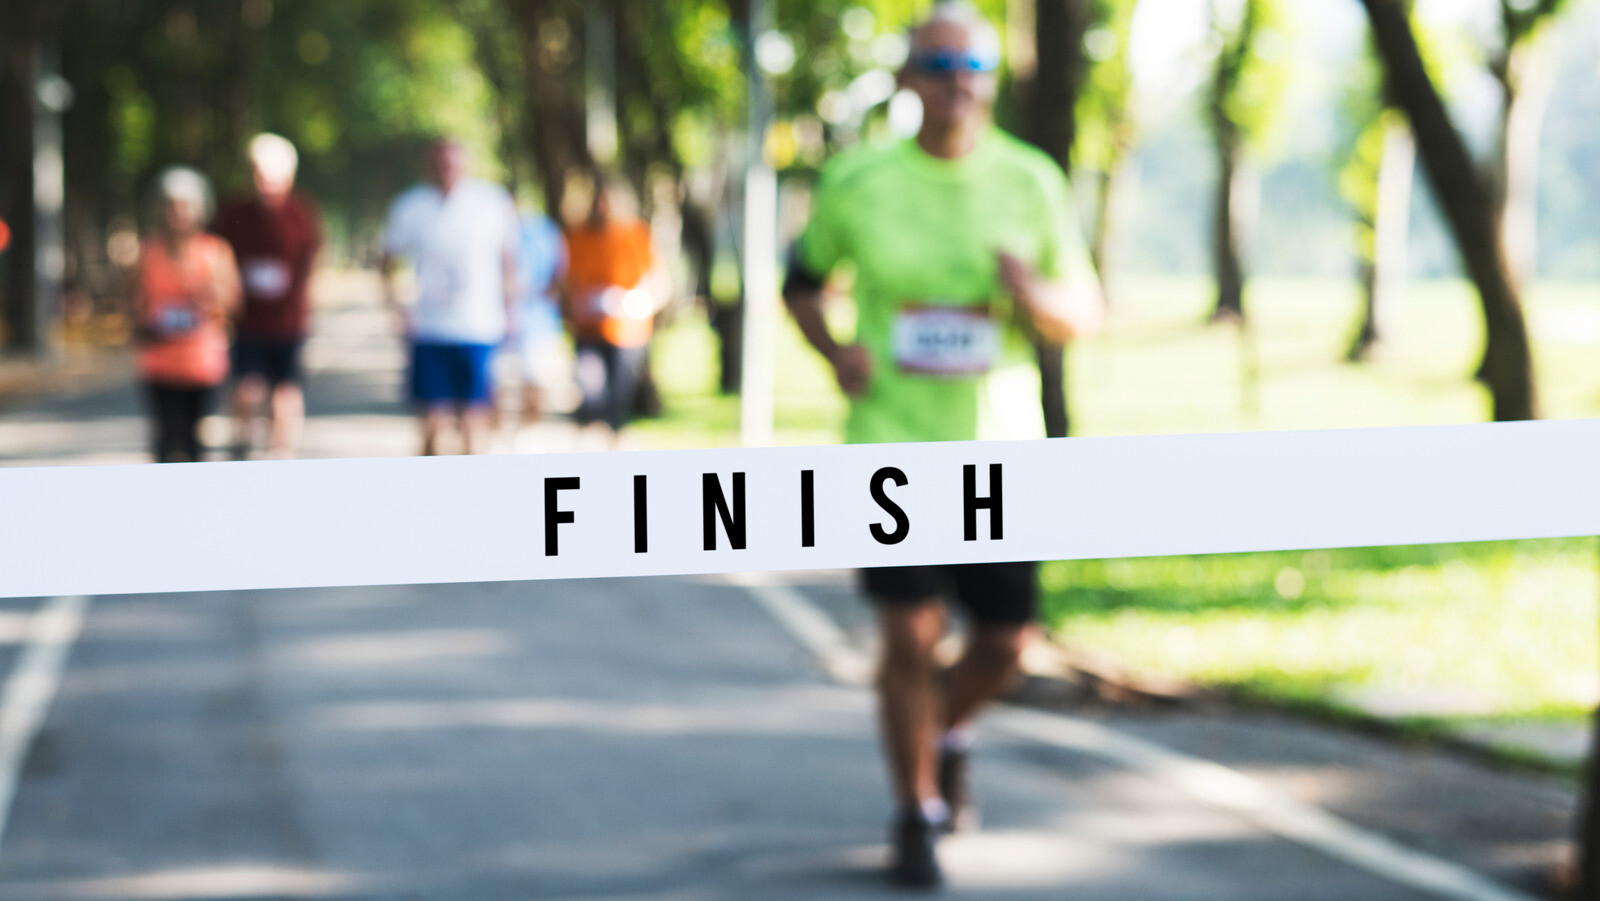 How to make a running mantra, for when you need a little motivational self-talk to get you to the finish line